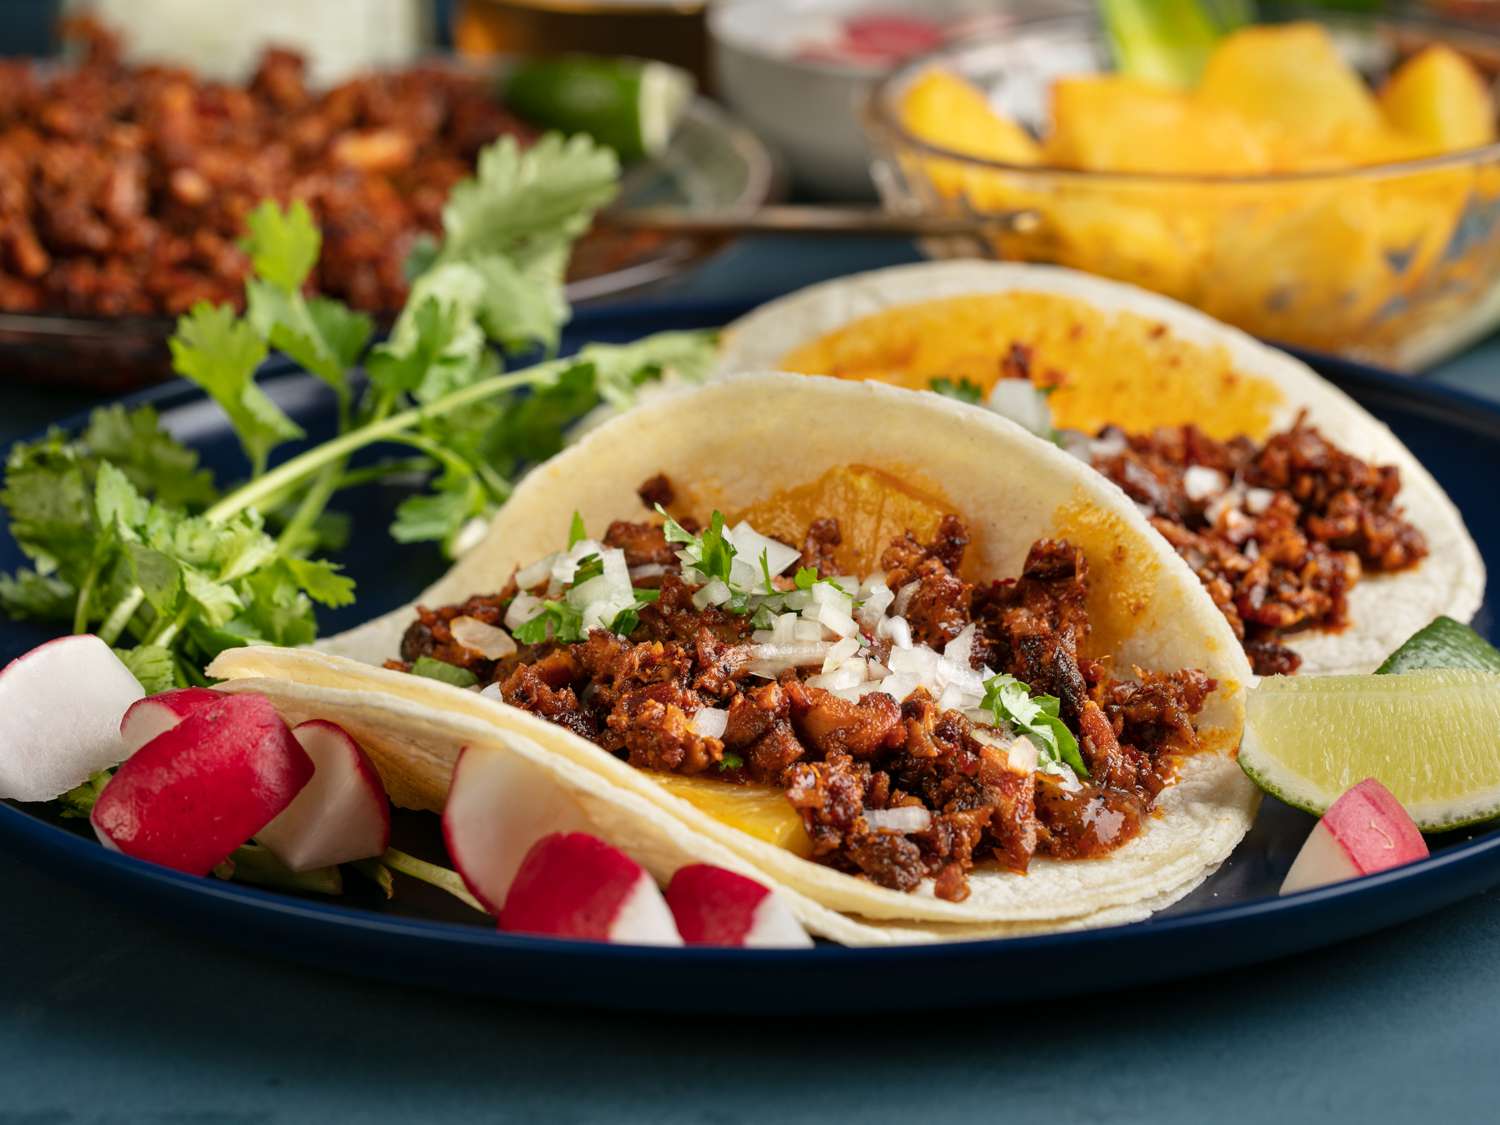 You got: Tacos! What Do I Want to Eat? This Quiz Reveals Your Perfect Meal!